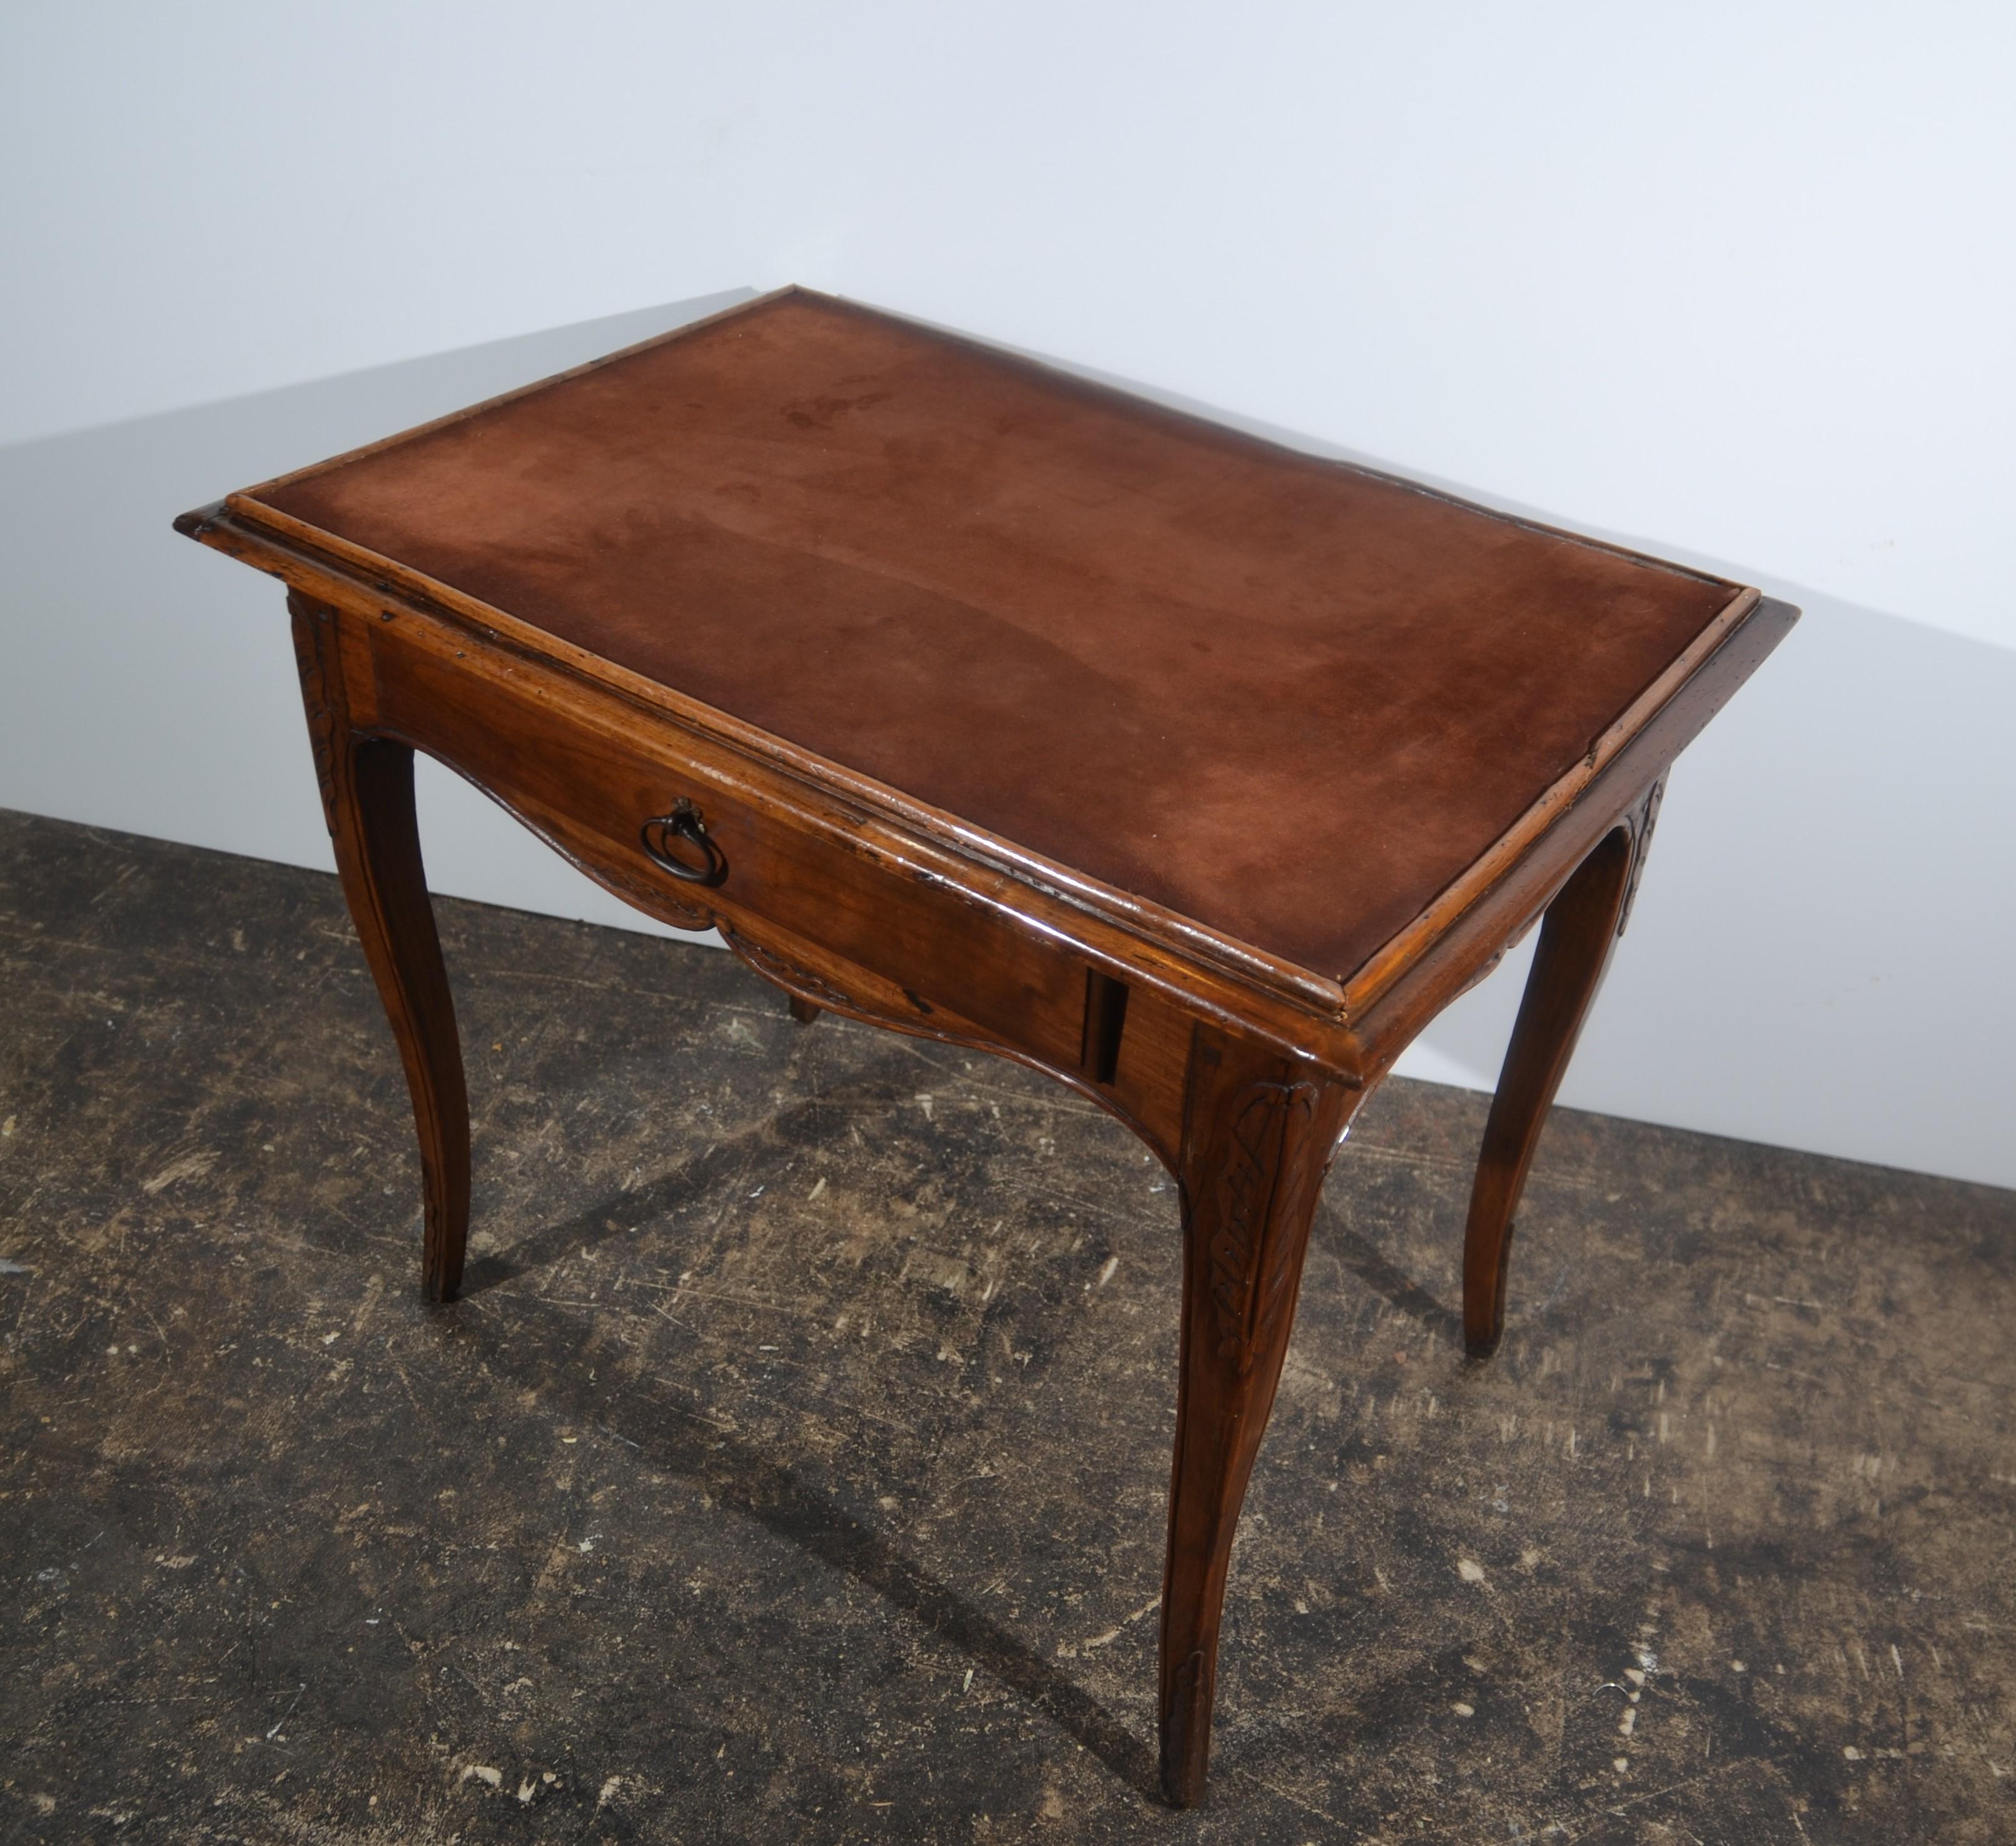 Fruitwood Antique French Provincial Side Table / Desk